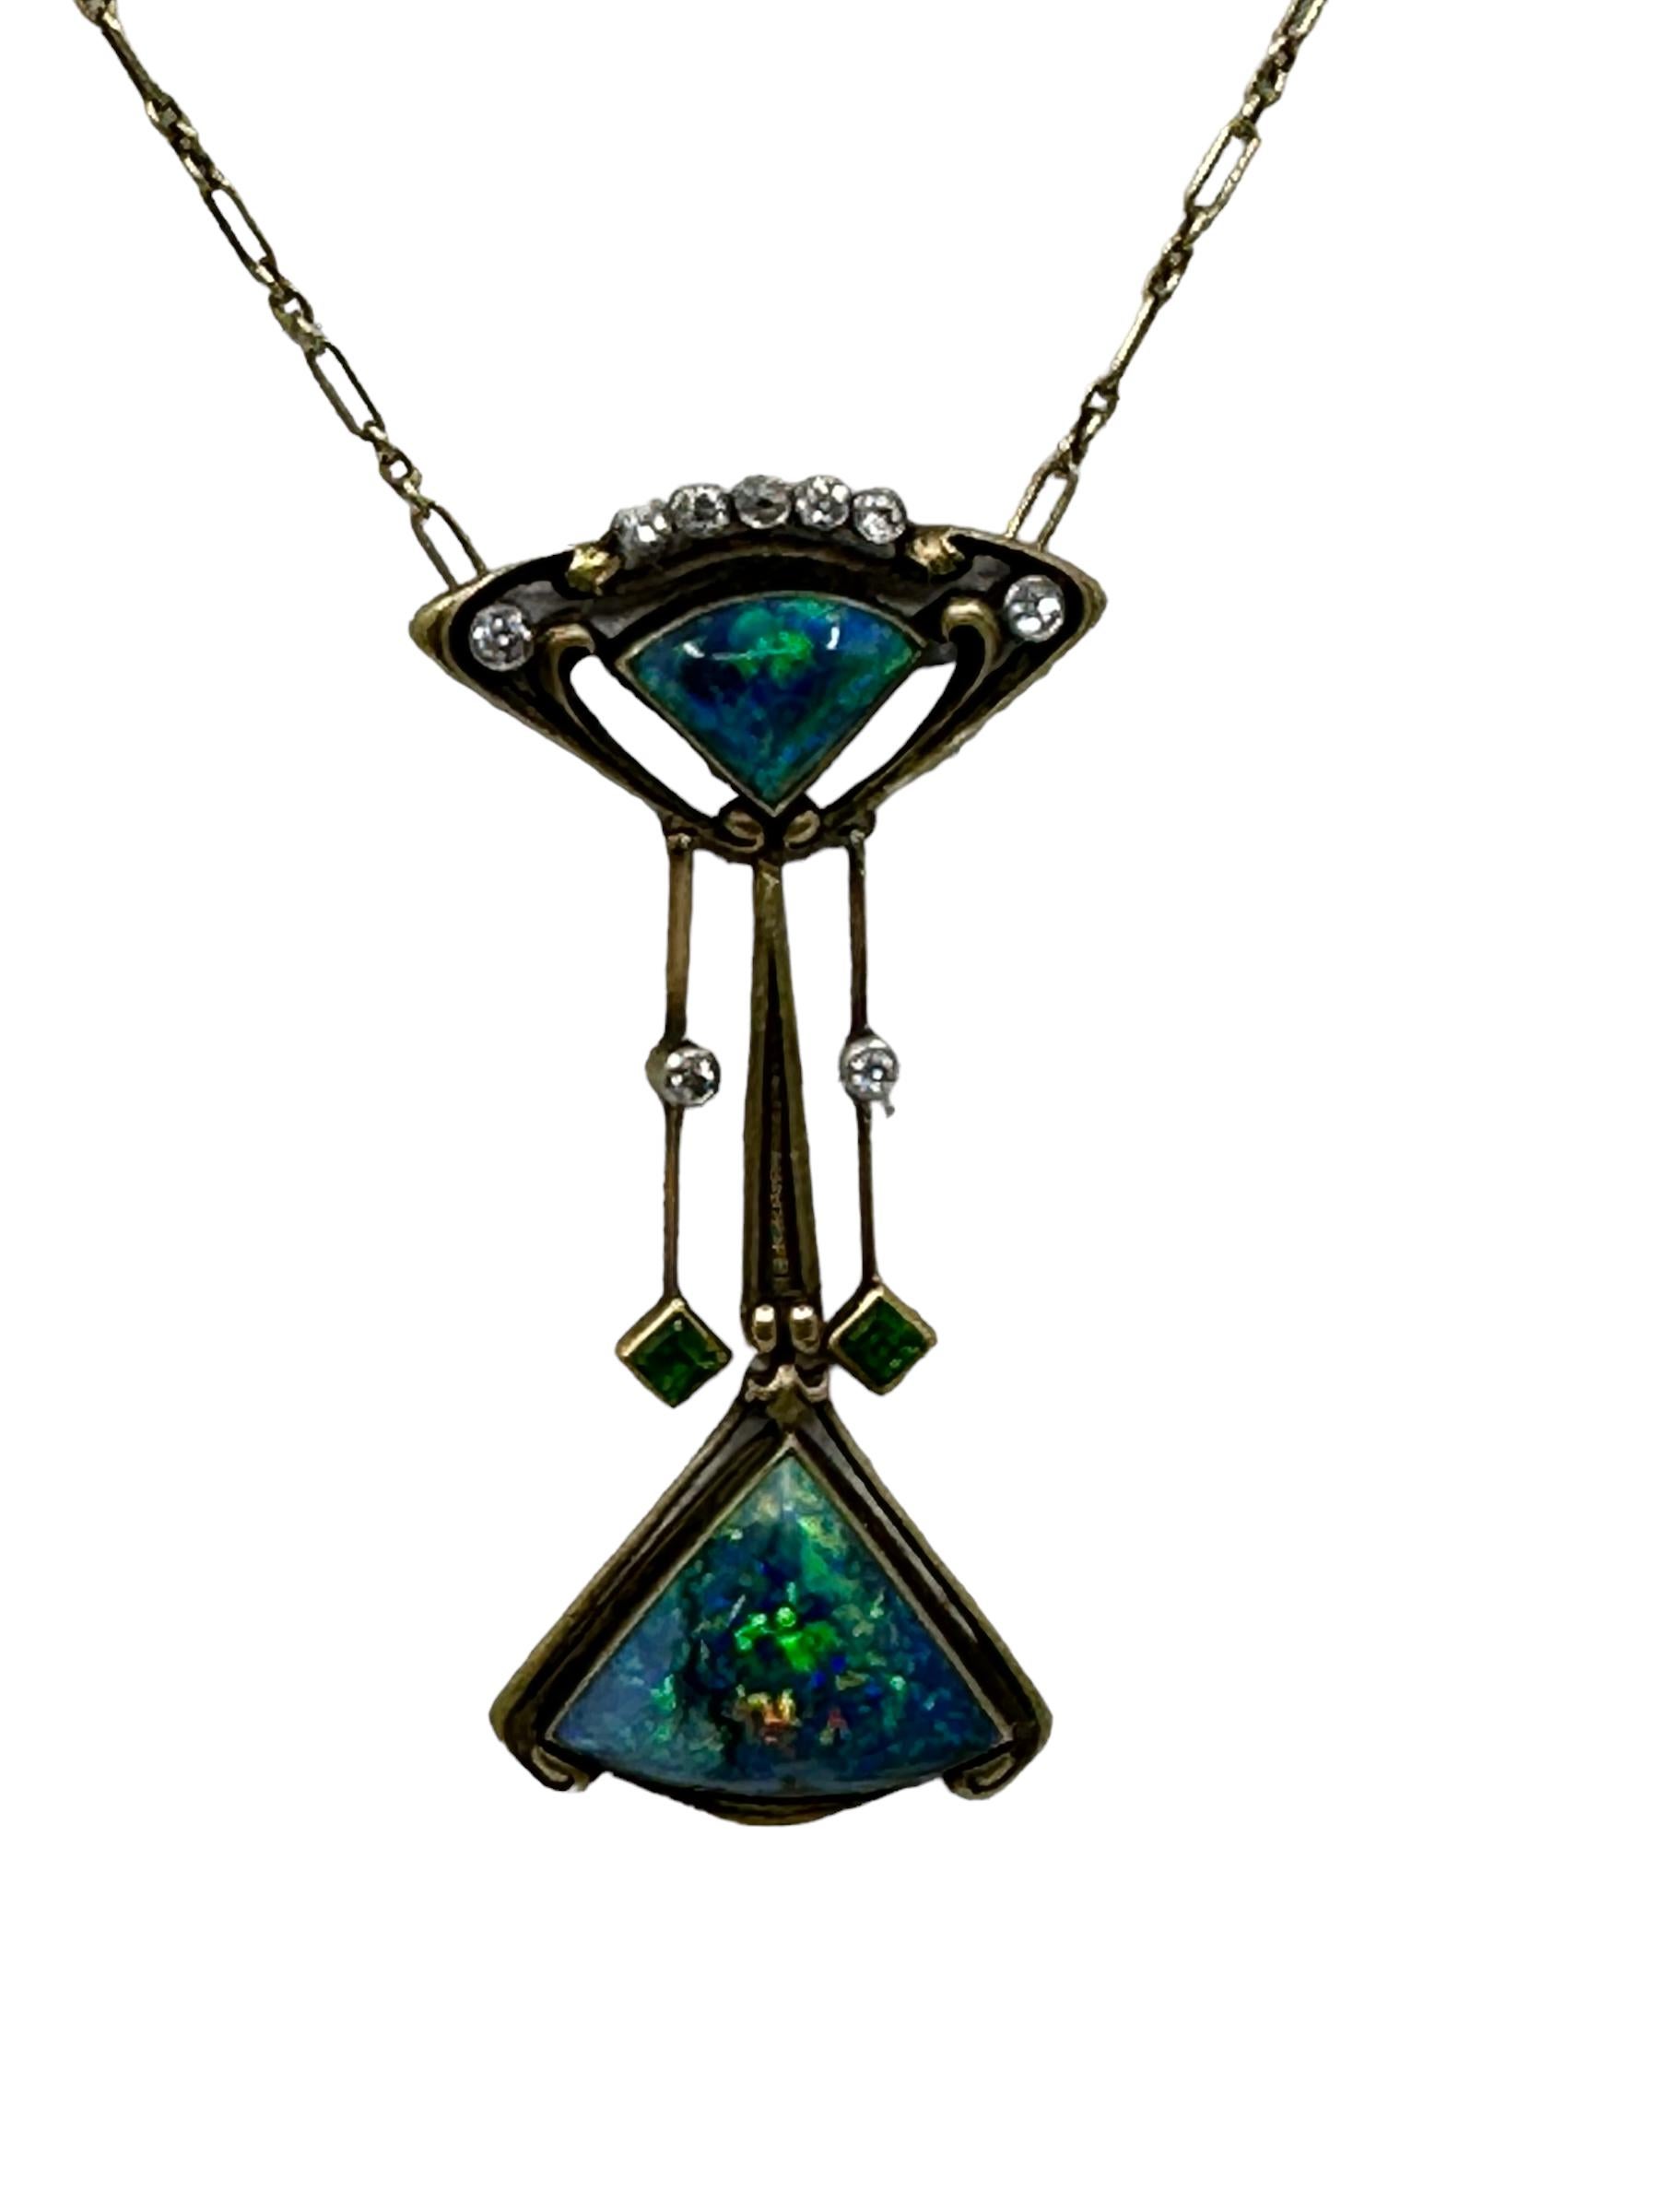 Stunning Art Nouveau Black Opal Diamond and Demantoid Garnet Necklace set in 14K Gold,
Articulated pendent supporting two fancy-cut black opals, accented by old mine-cut diamonds and demantoid garnets.
• Length 16 inches (40cm) 
• Pendent 2